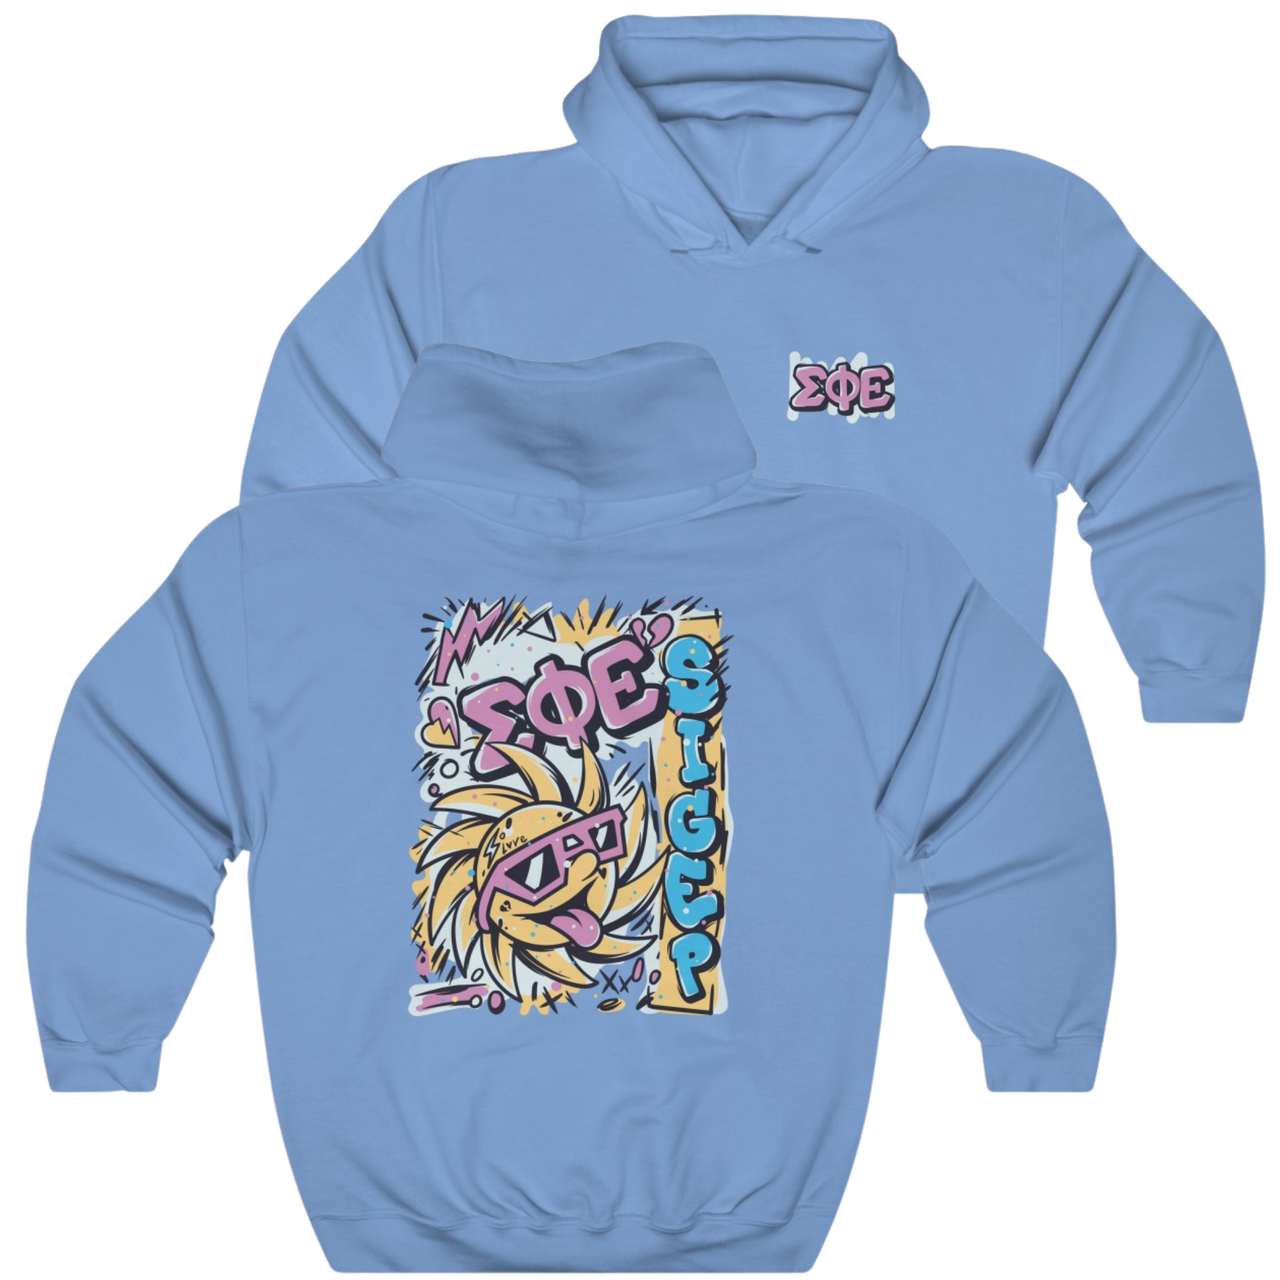 Light Blue Sigma Phi Epsilon Graphic Hoodie | Fun in the Sun | SigEp Clothing - Campus Apparel